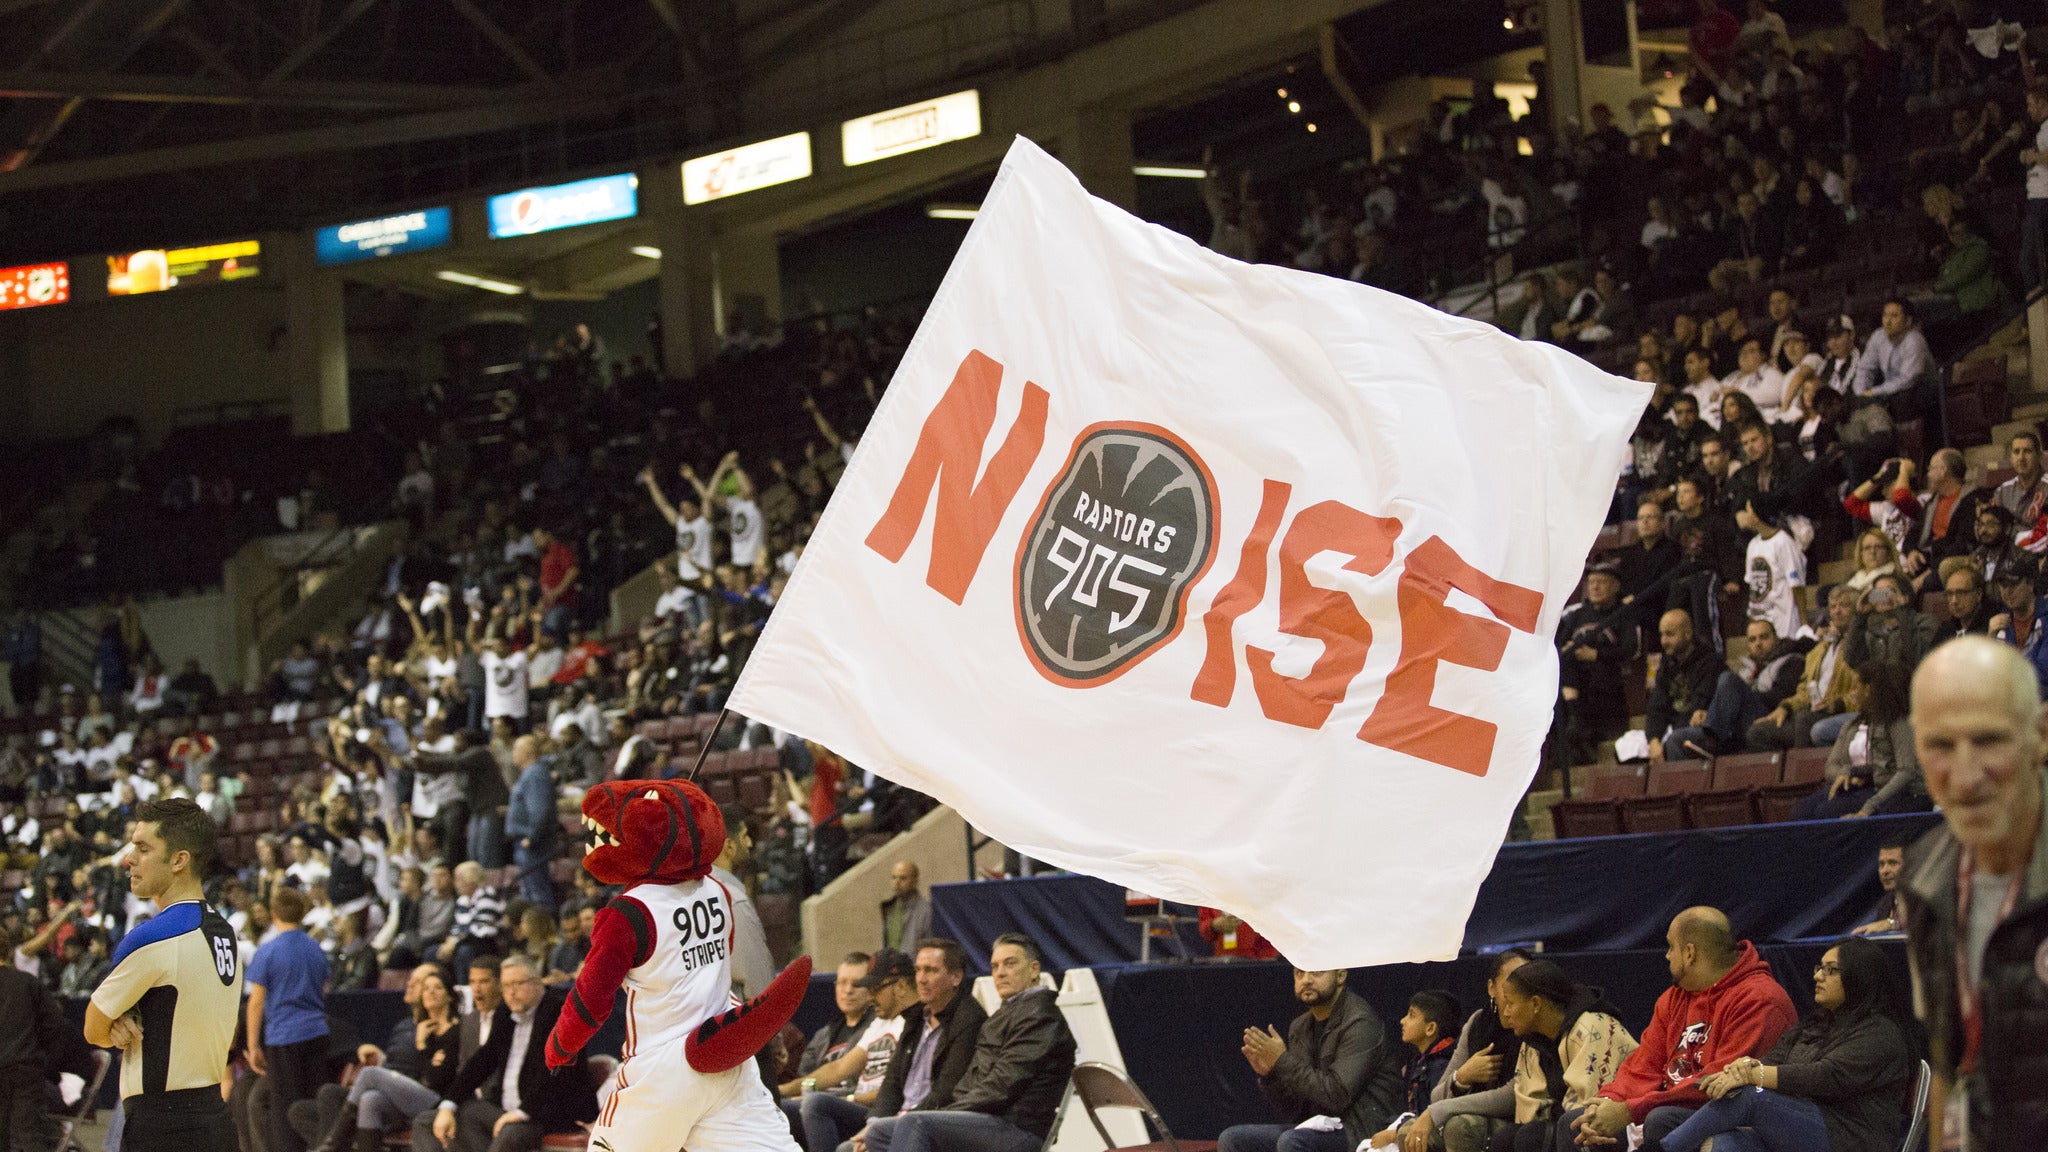 Raptors 905 Playoffs - Round 4 Home Game 1 in Mississauga promo photo for Group Leaders presale offer code